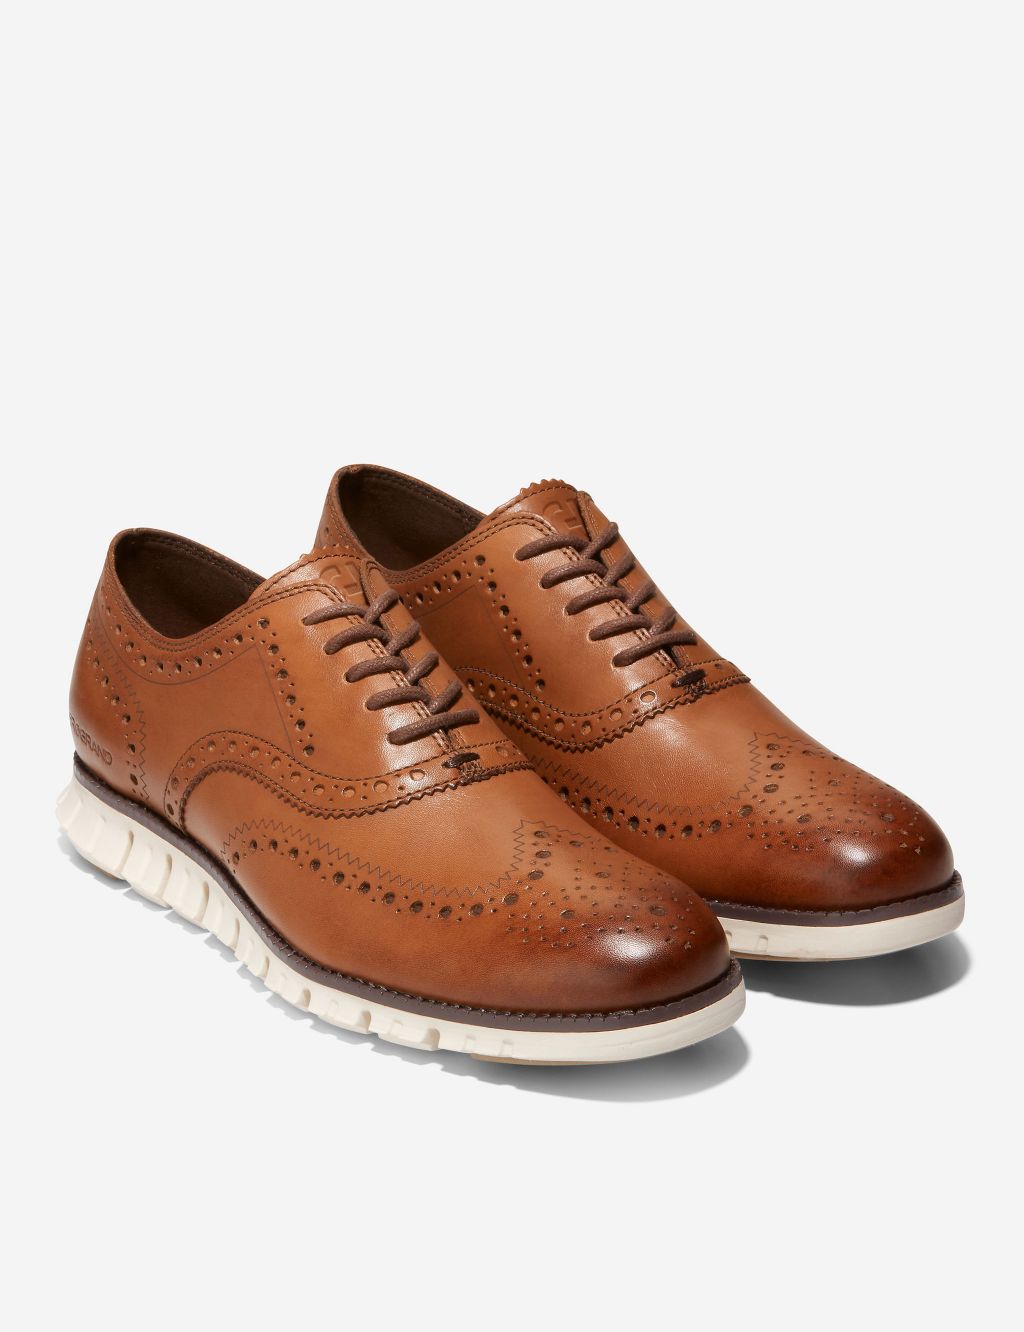 Zerogrand Wingtip Leather Oxford Shoes image 2